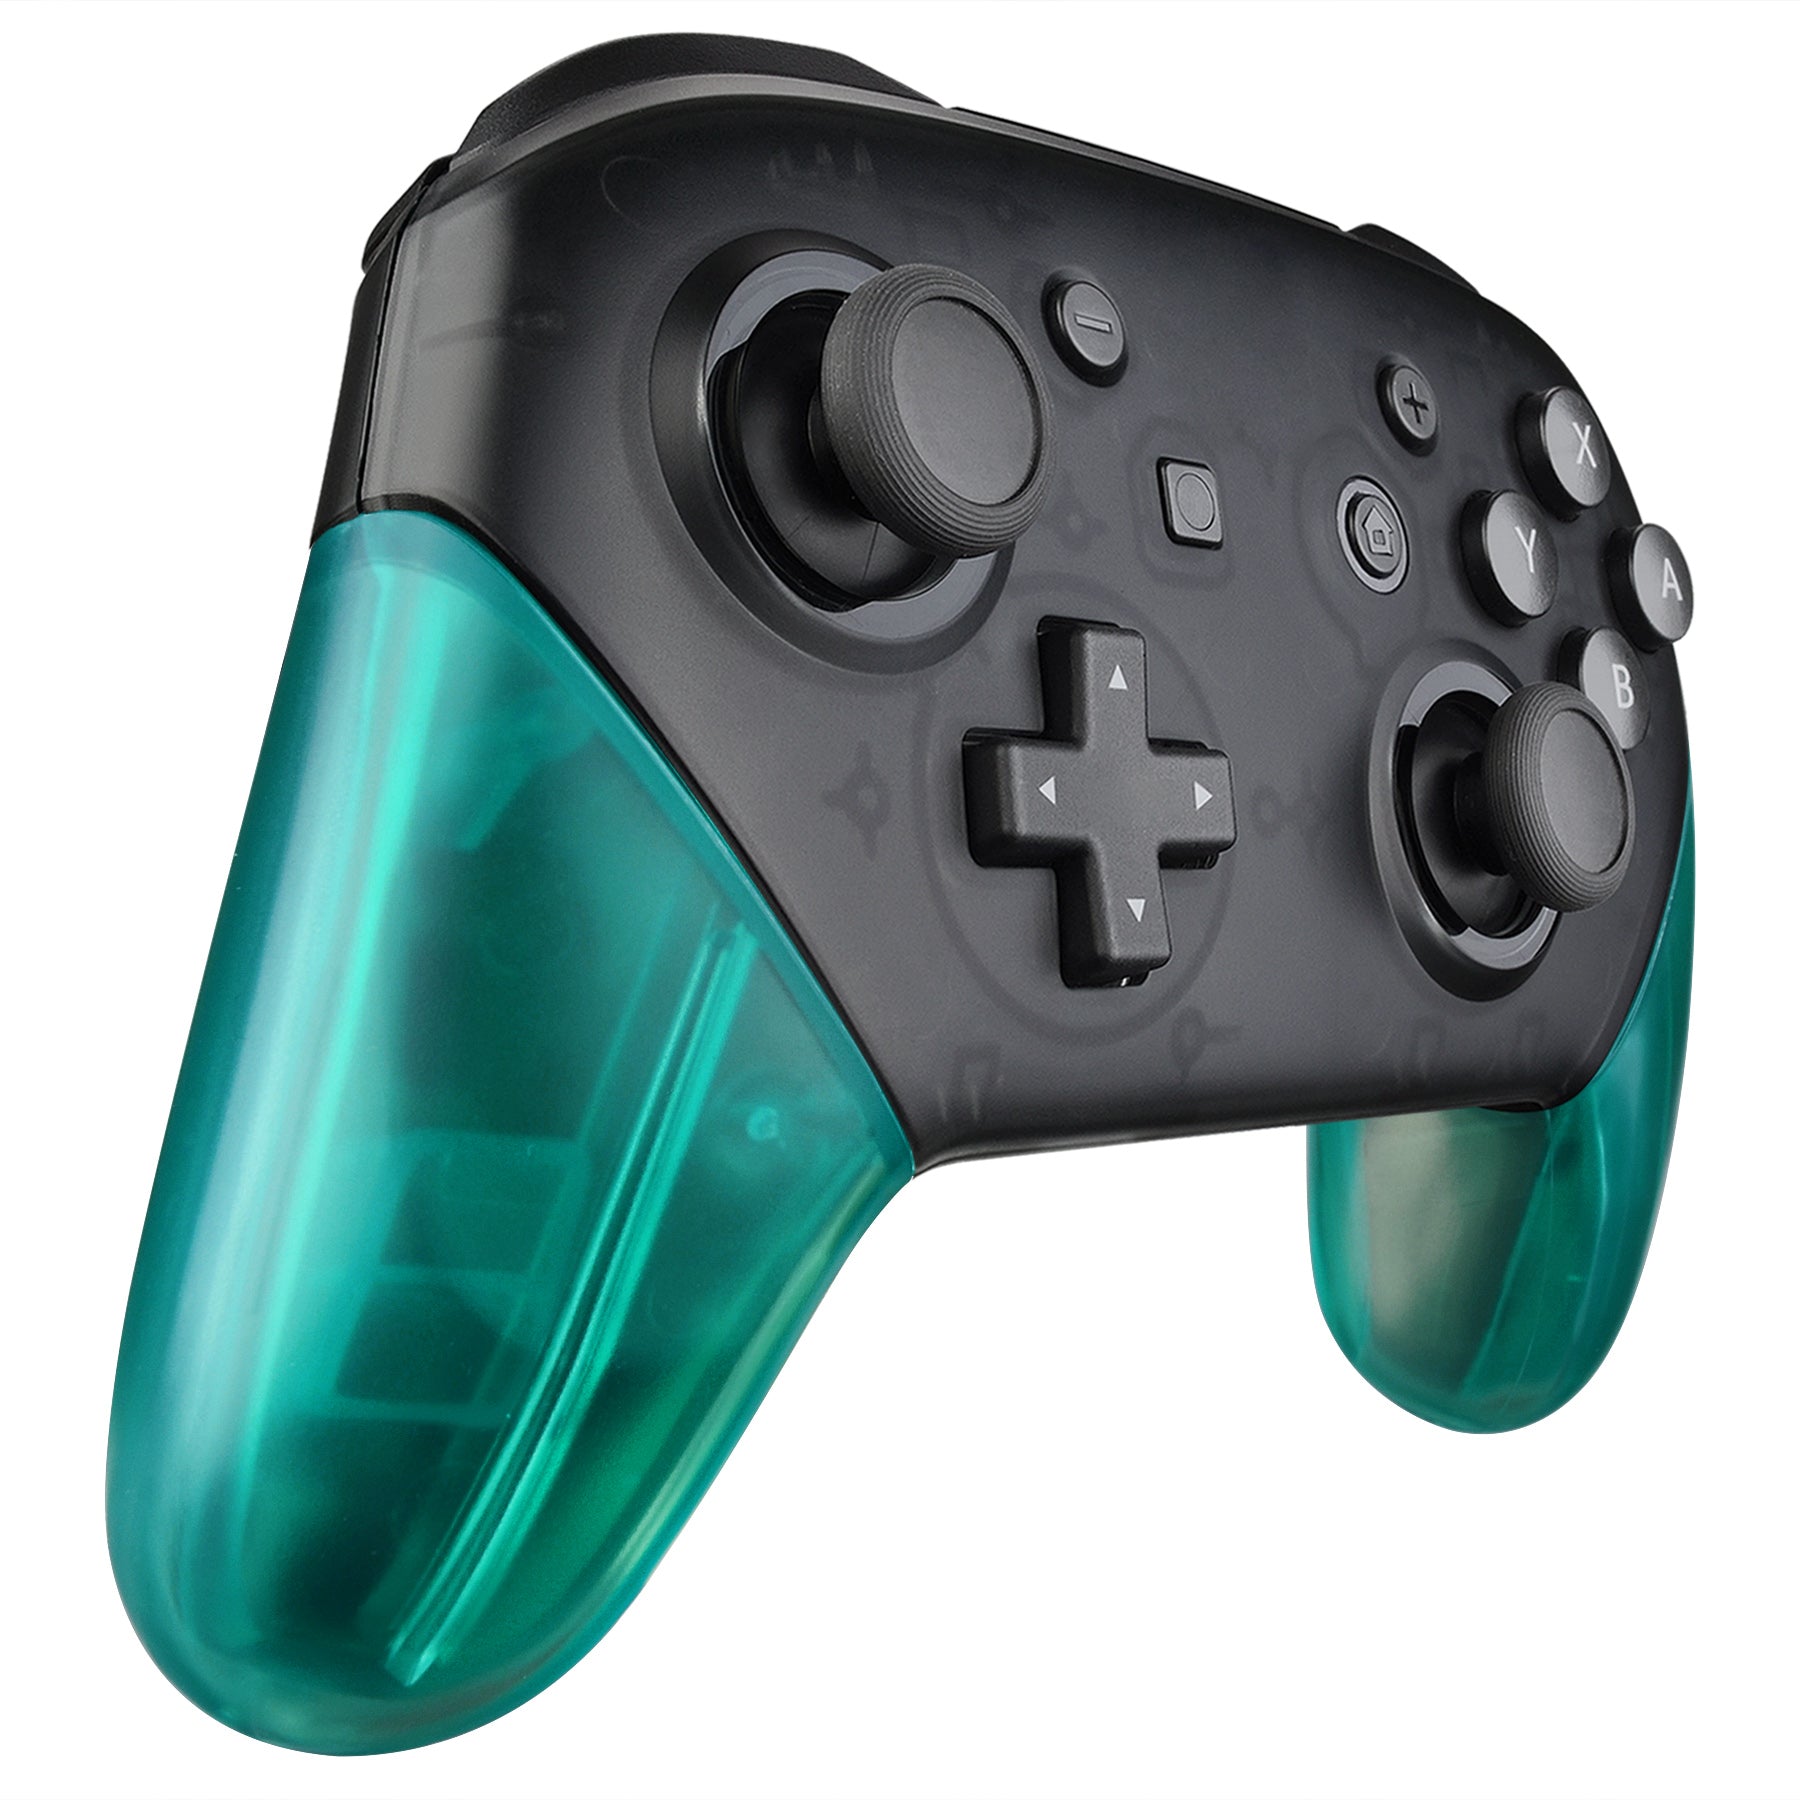 eXtremeRate Retail Emerald Green Replacement Handle Grips for Nintendo Switch Pro Controller, DIY Hand Grip Shell for Nintendo Switch Pro - Controller NOT Included - GRM508